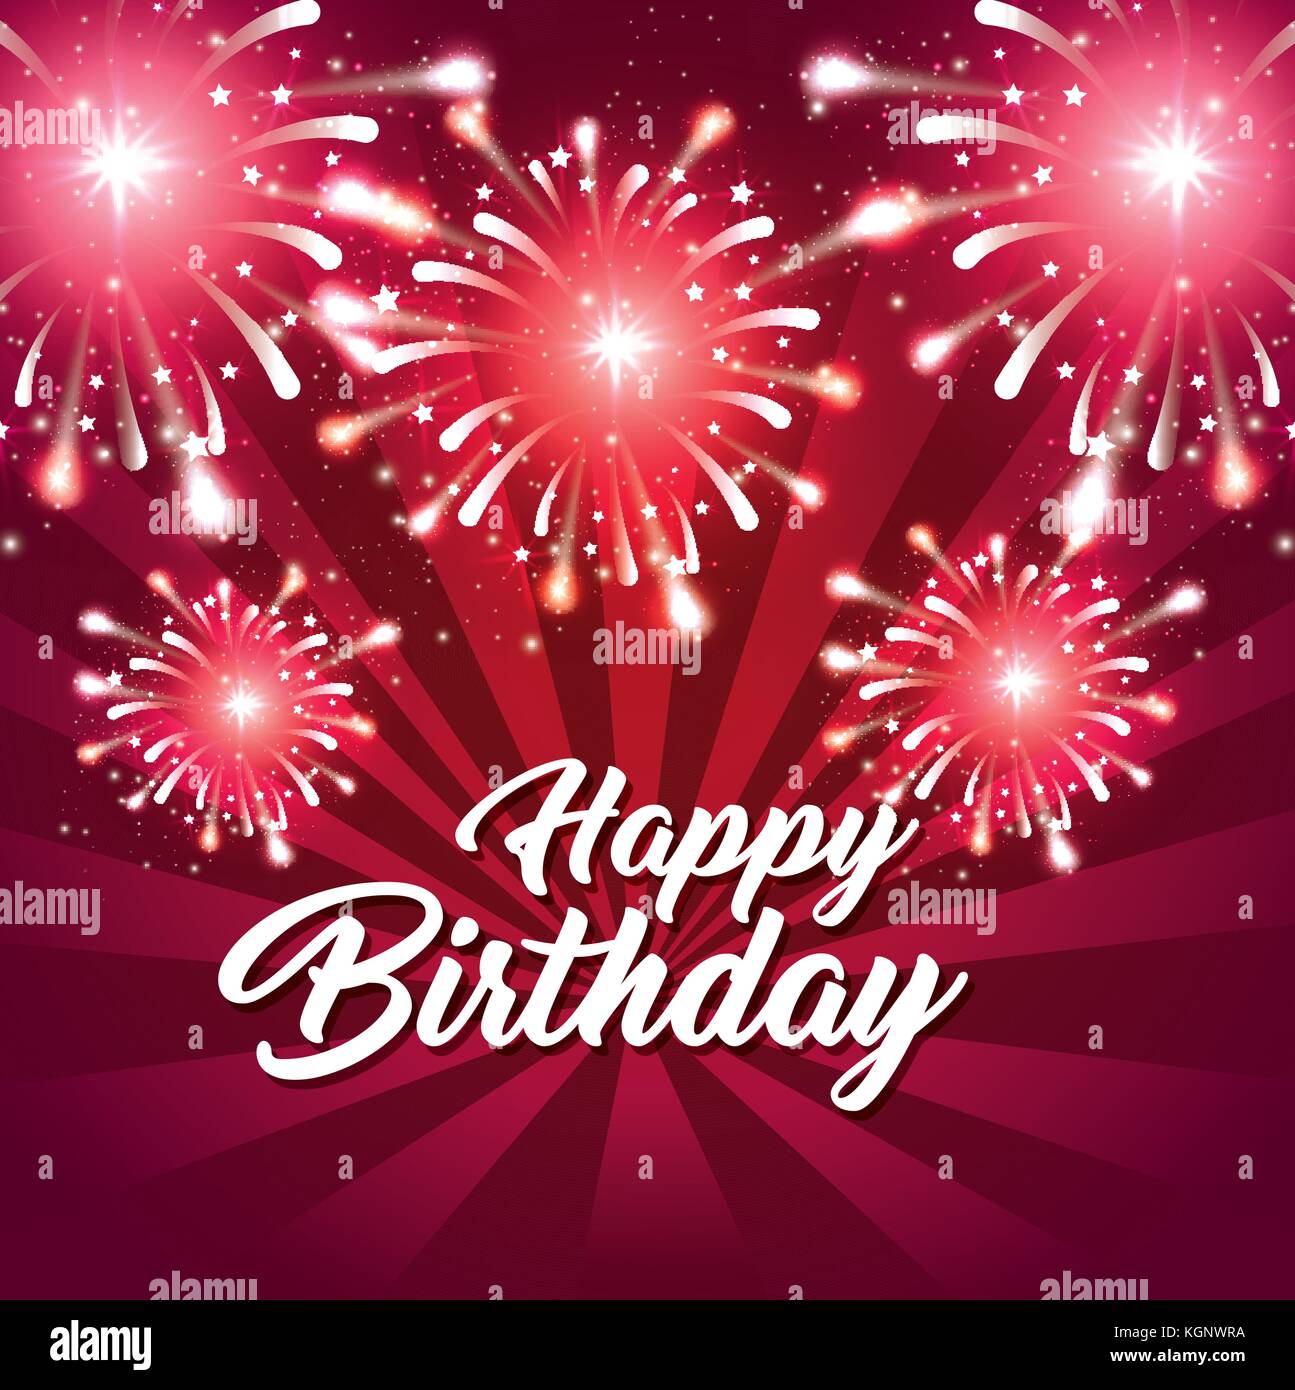 happy birthday greeting card colorful fireworks vector ...